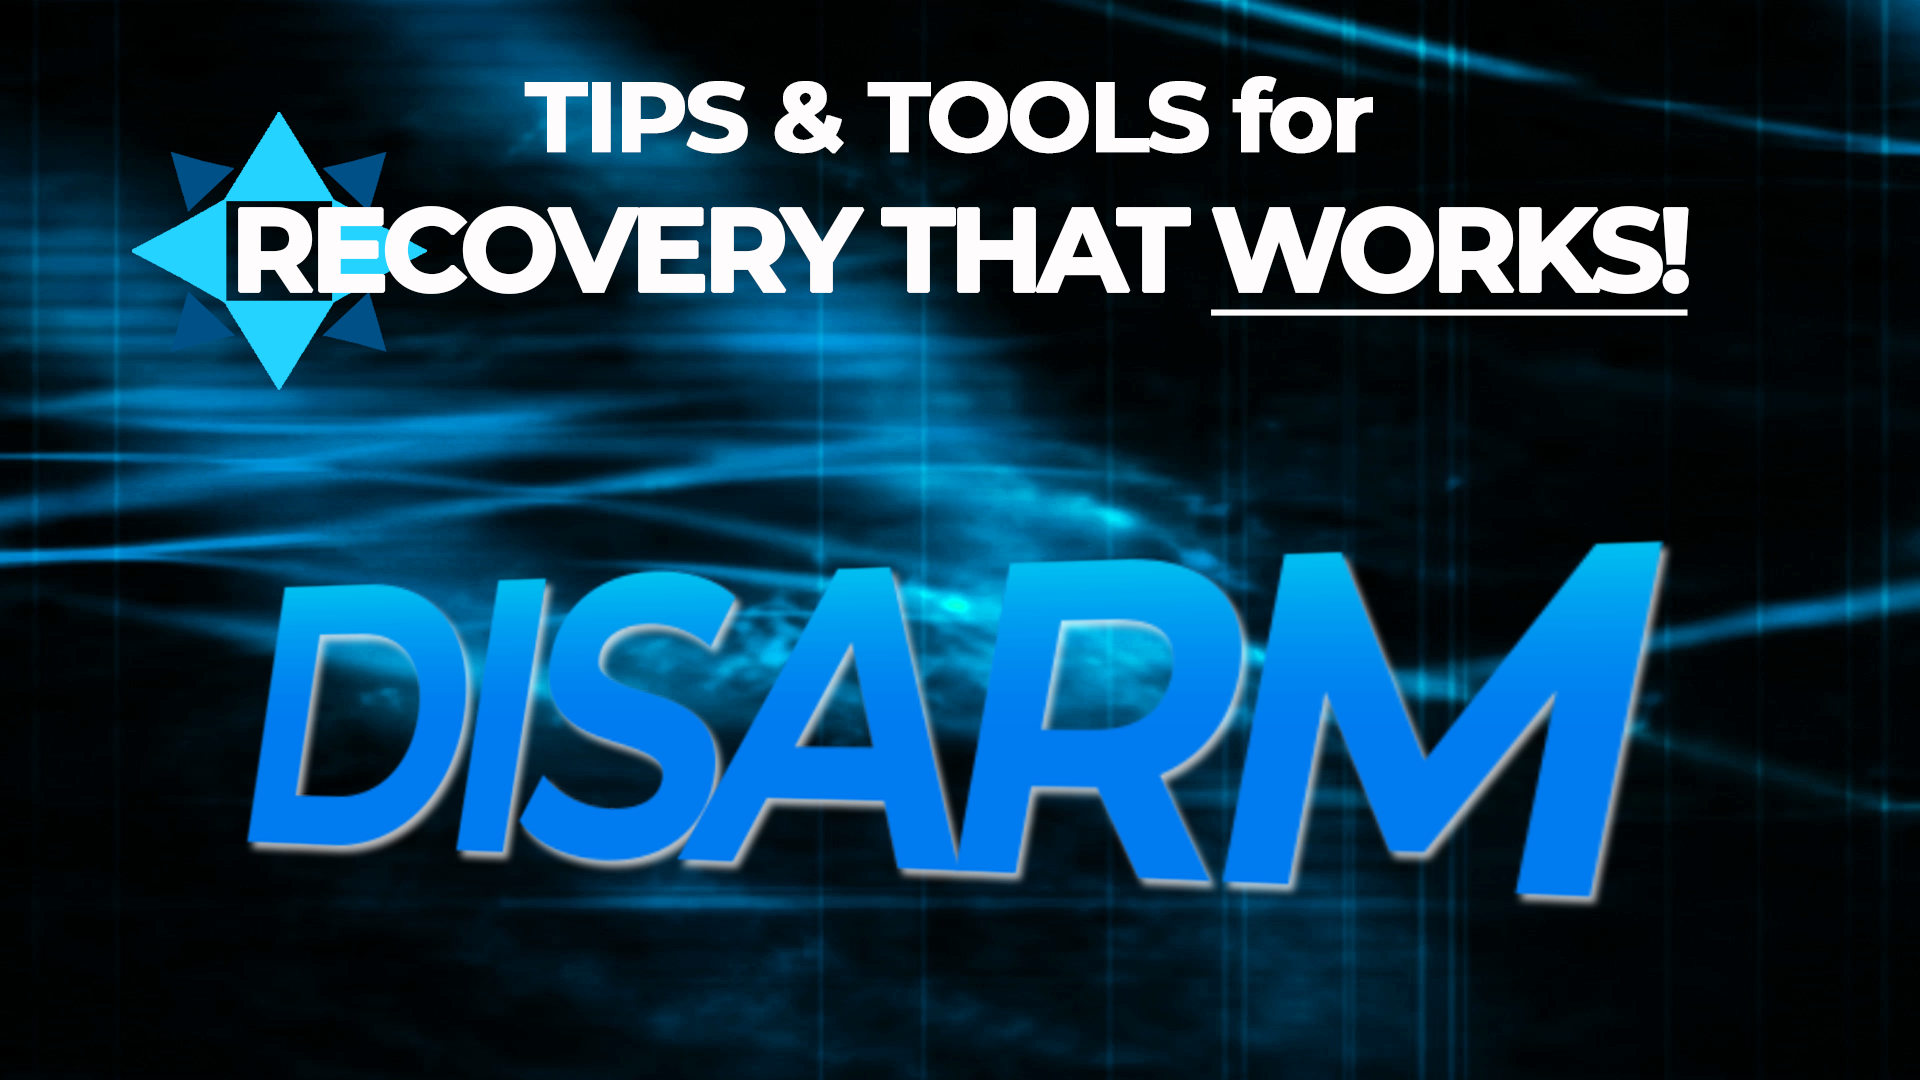 [Video] The DISARM Method – Tips & Tools for Recovery That Works!